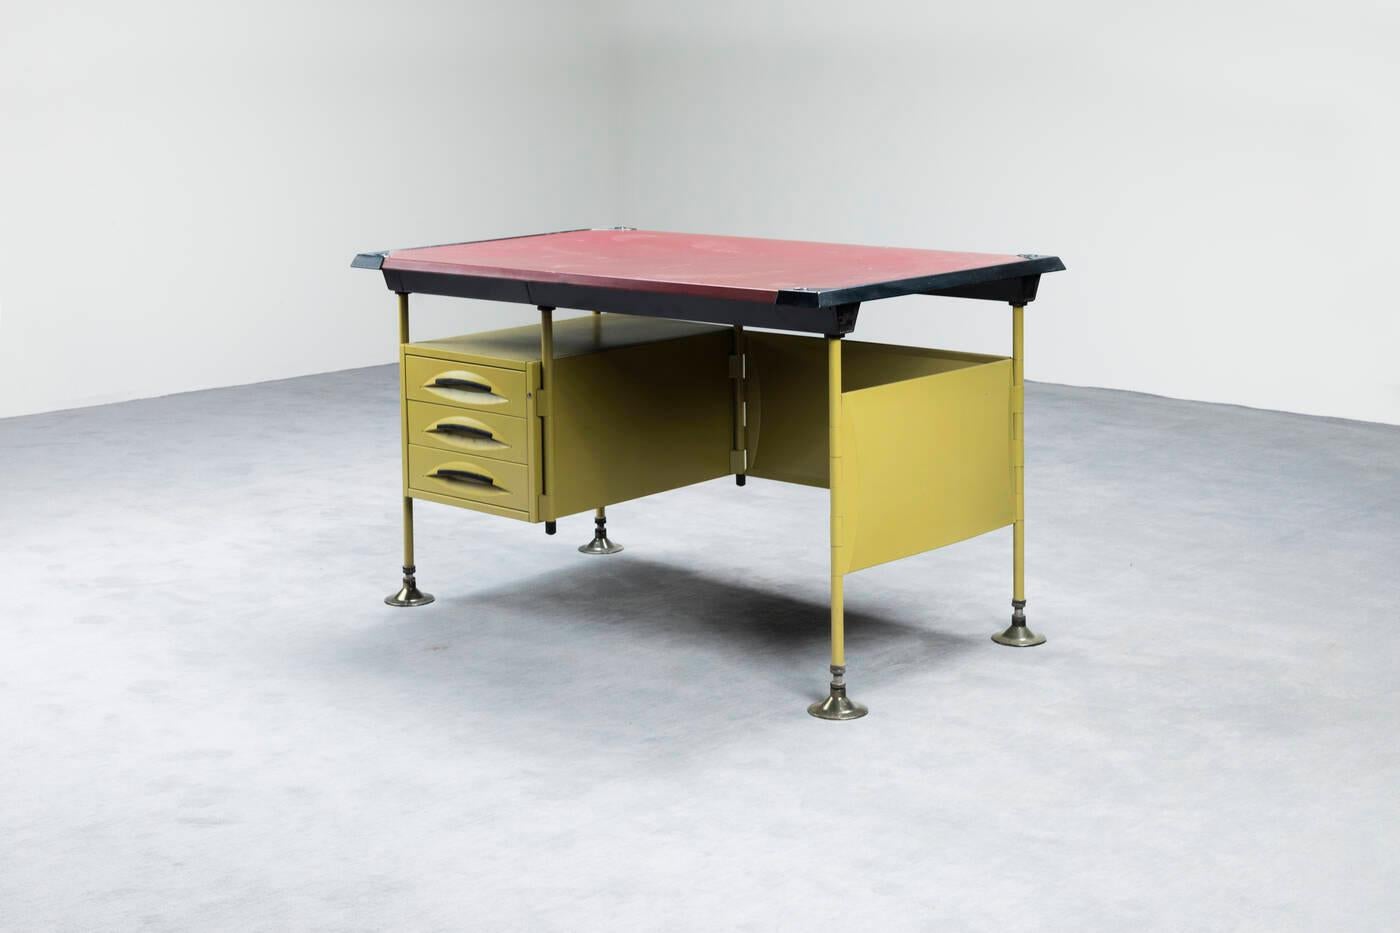 ‘Spazio’ series’ desk by Studio BBPR for Olivetti
Lacquered metal, leatherette, black plastic details.
Manufactured in Italy, 1961

Measures: Width 130 x Depth 80 x Height 80 Cm.